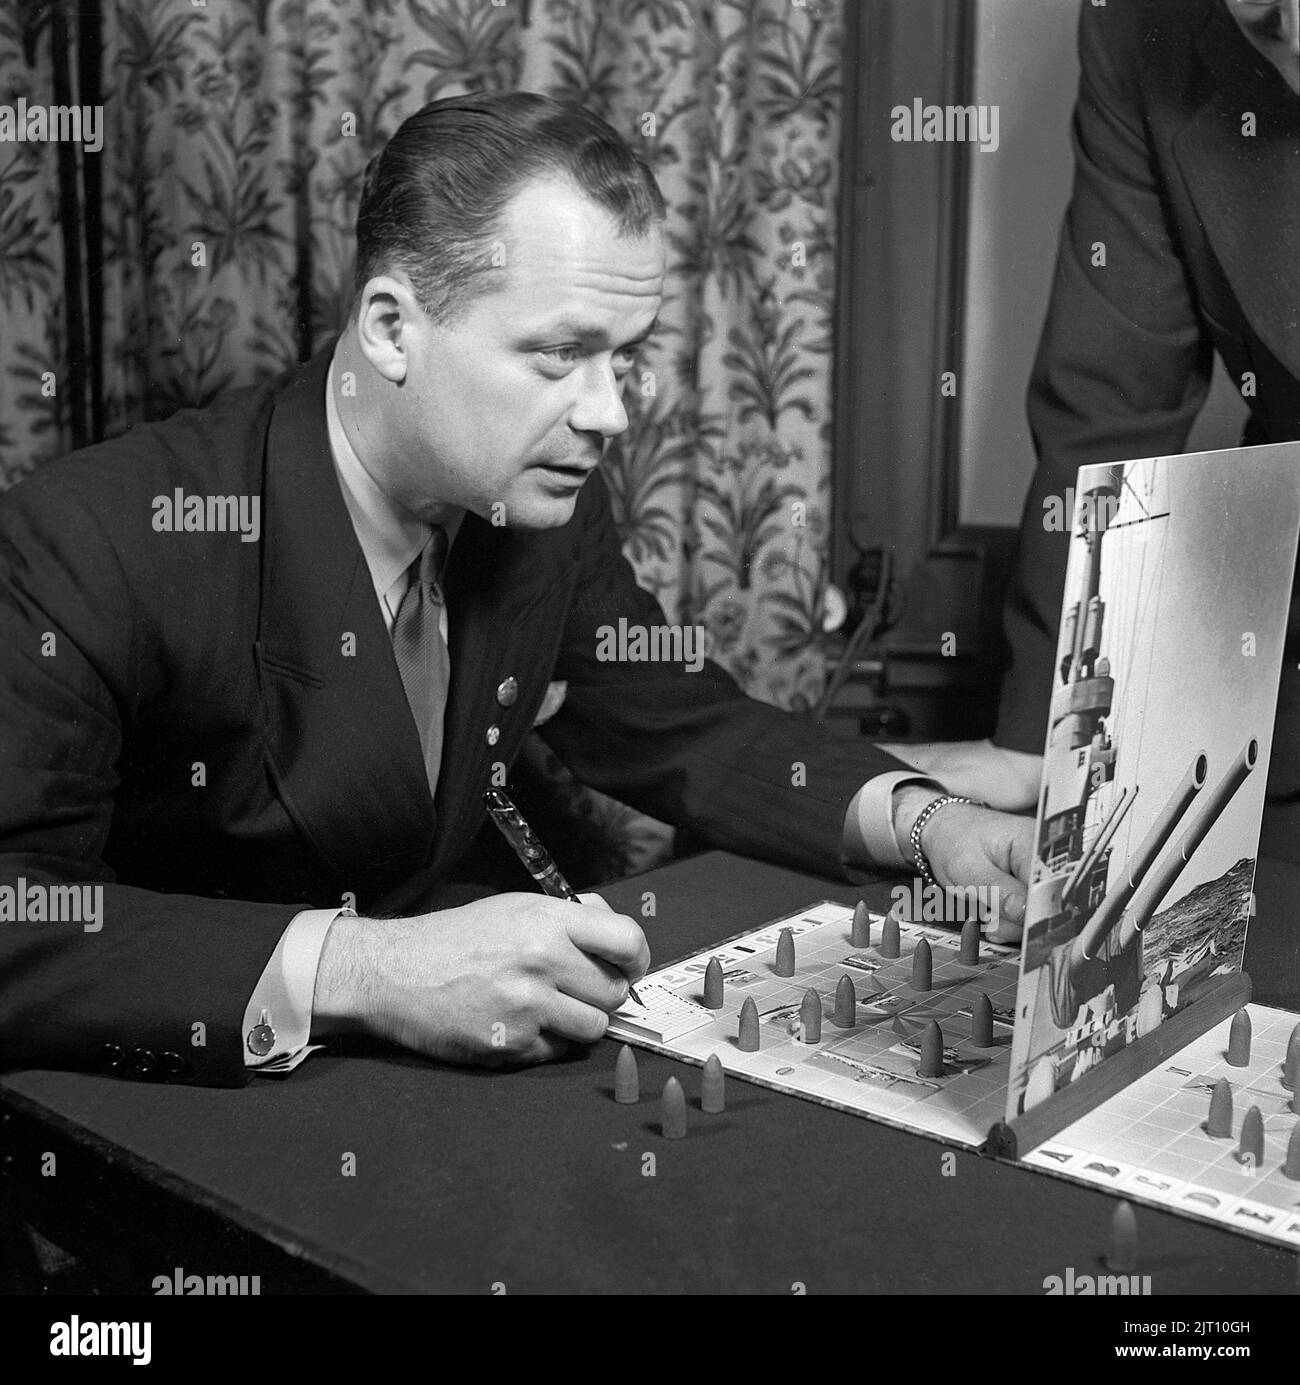 Playing games in the 1940s. A man is playing the game Tak-tic, similar to the game Sinking ship. The objective is to to guess where the oponents ship is at and then continue guessing until the ship is sunk. Sweden 1942 Kristoffersson B58-3 Stock Photo